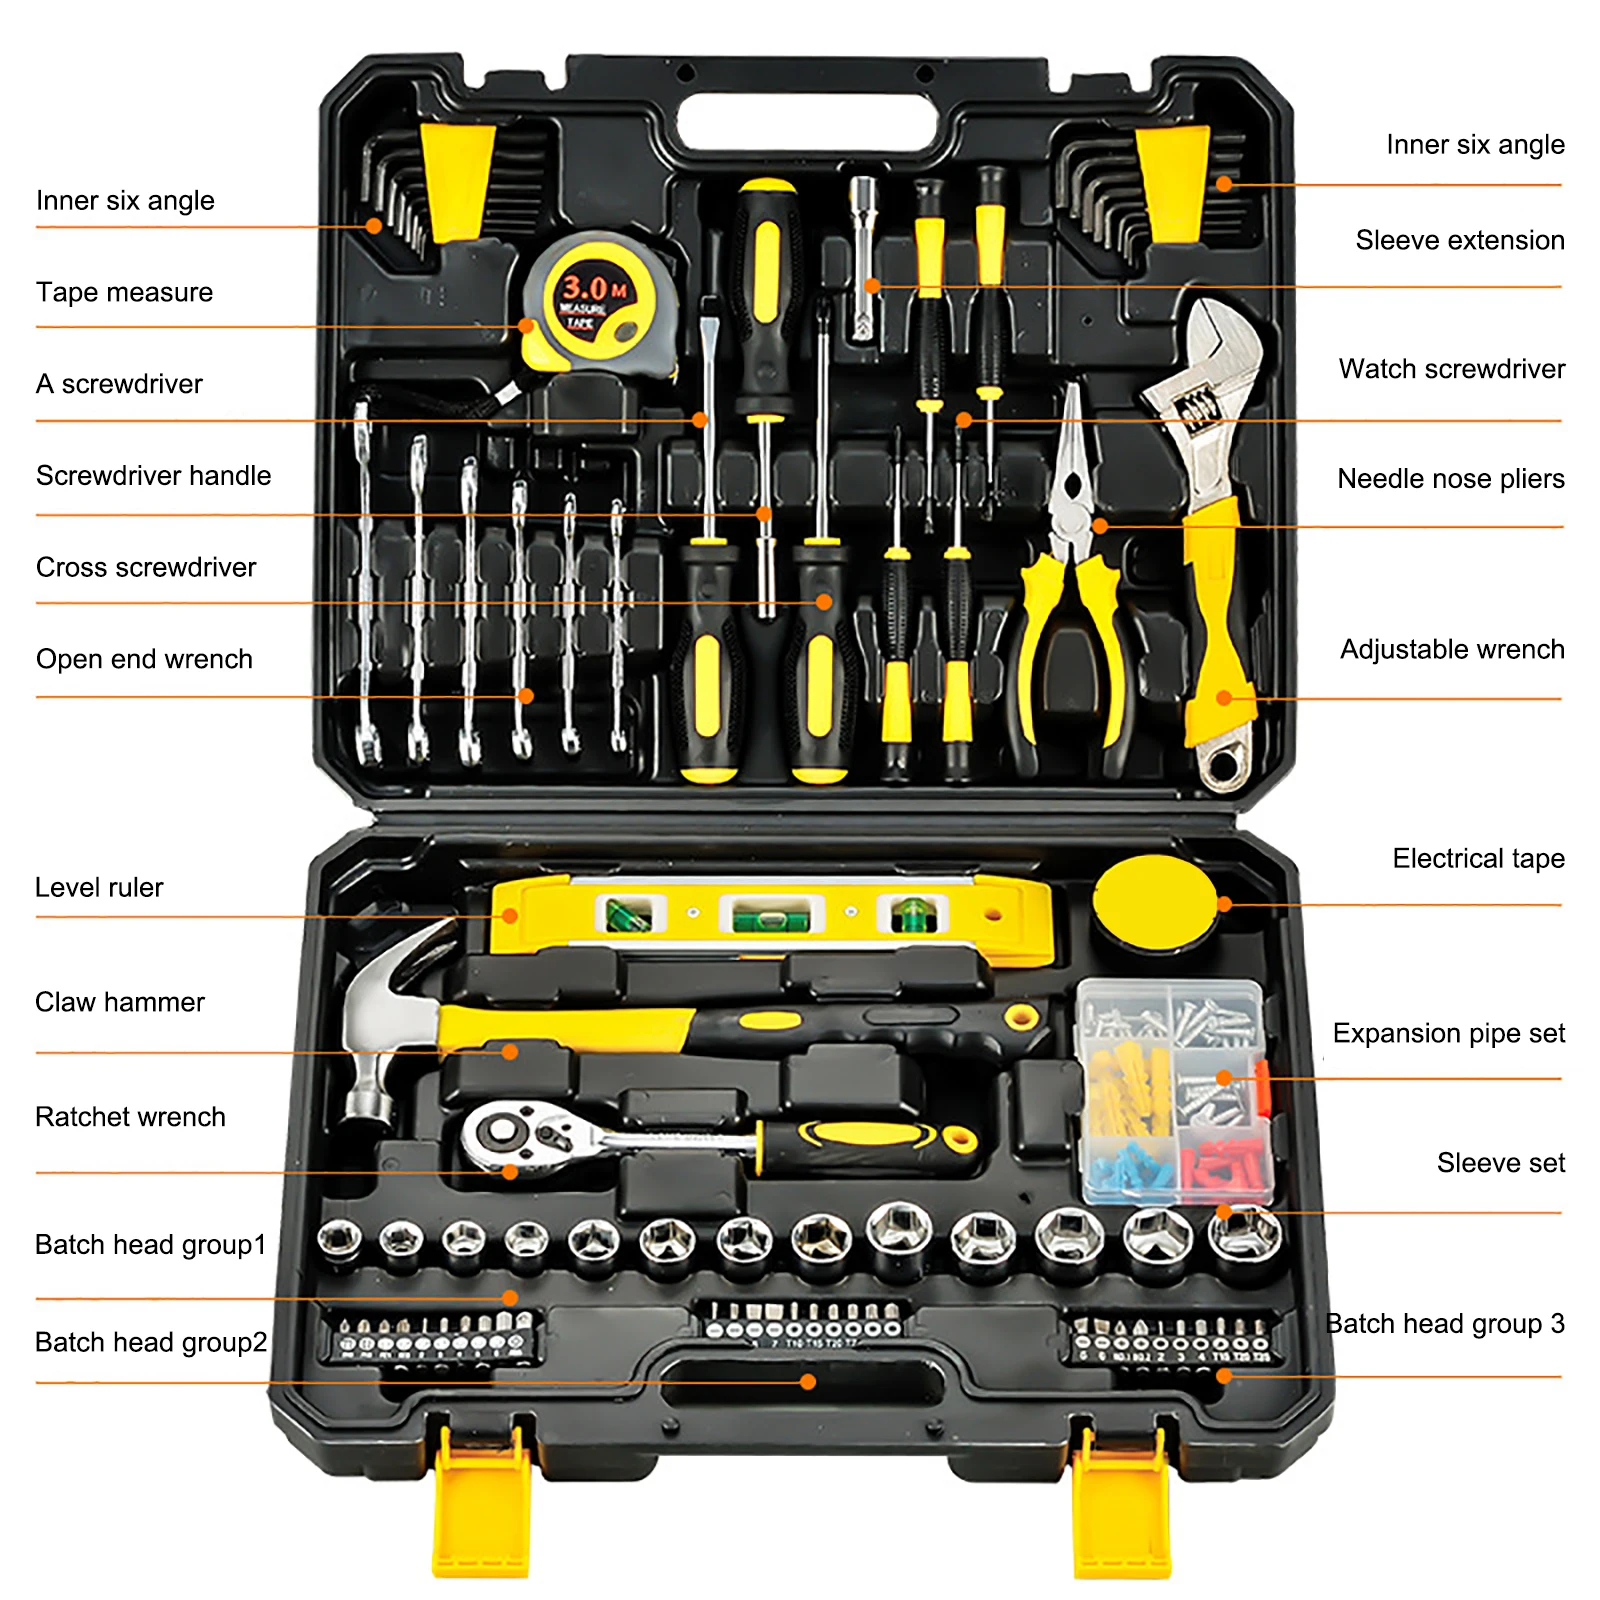 

108PC Hardware Hand Tool Combination Socket Set and Torque Wrench Auto Repair Applicable for Home Improvement Equipment Repair